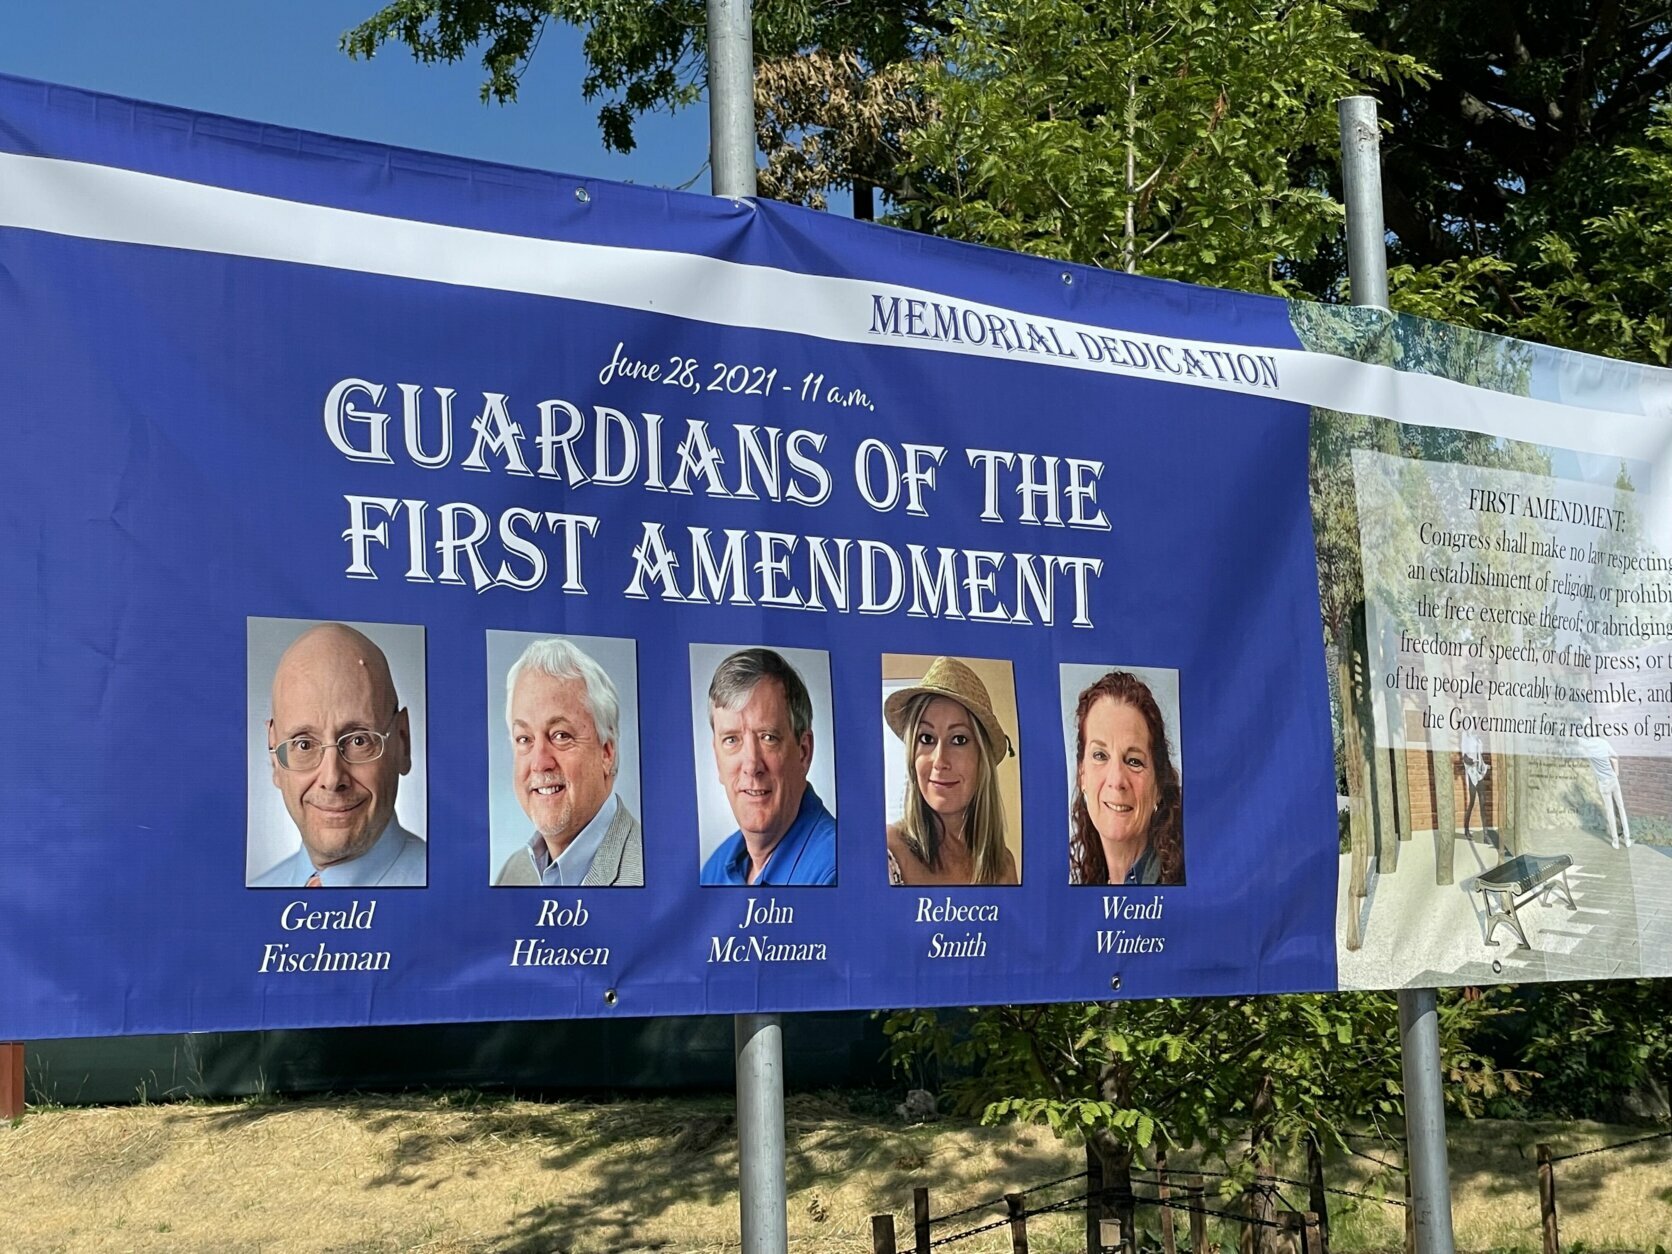 Survivors and family members of victims of the five people who died in a mass shooting at the Capital Gazette newspaper dedicated a memorial to them and the First Amendment on Monday on the third anniversary of the attack (WTOP/Meghan Cloherty).